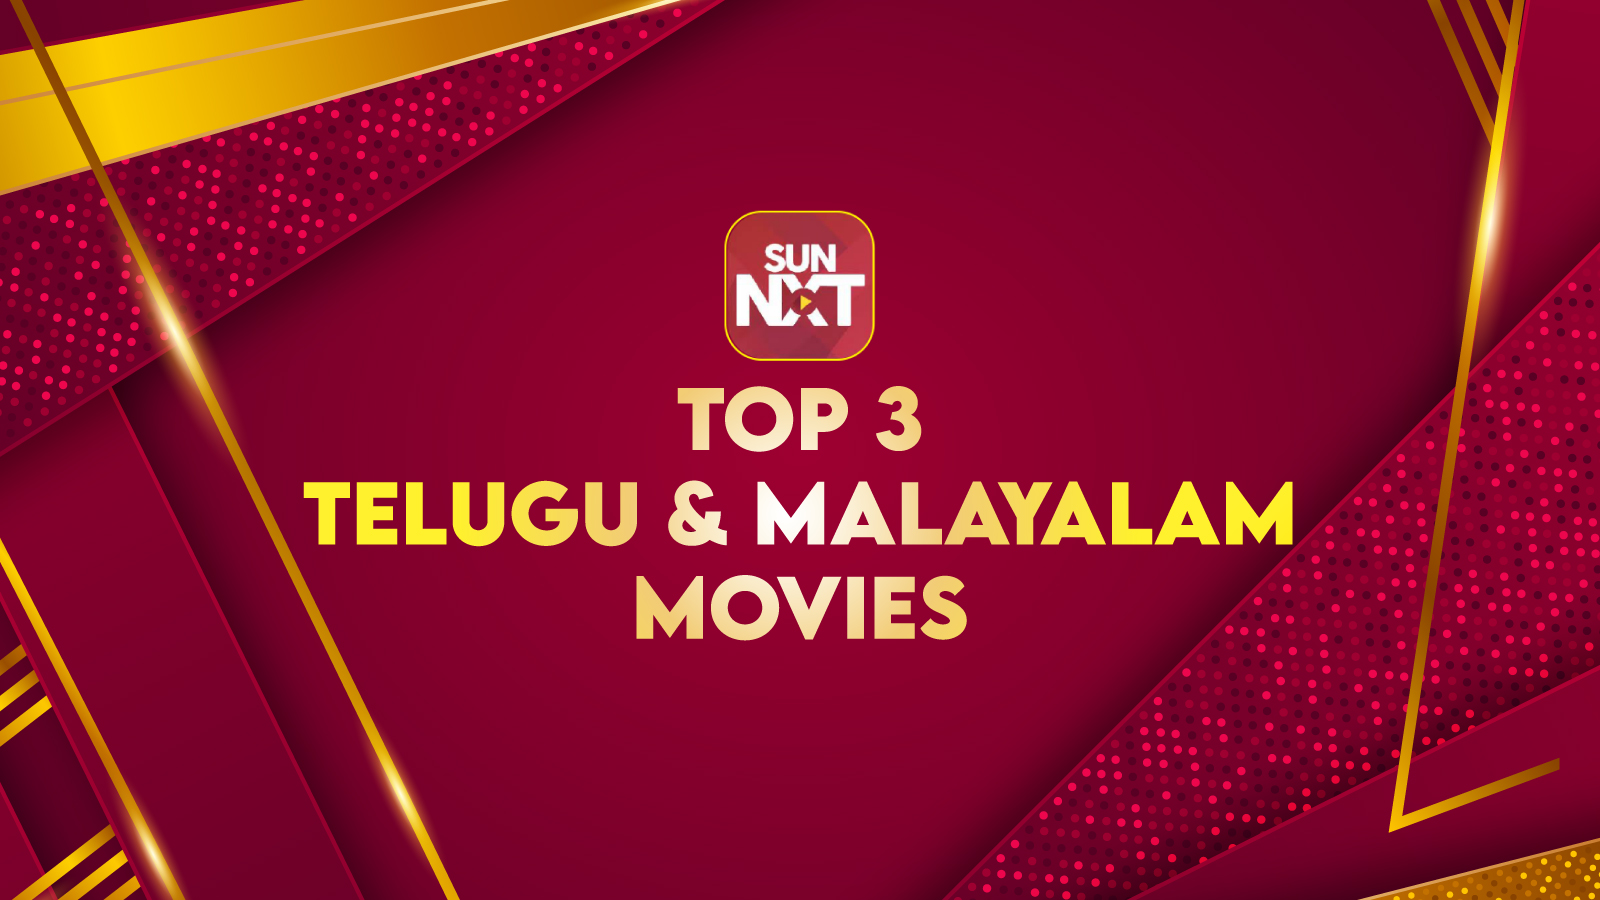 What are the Top 3 Telugu & Malayalam Movies available on SunNXT App?